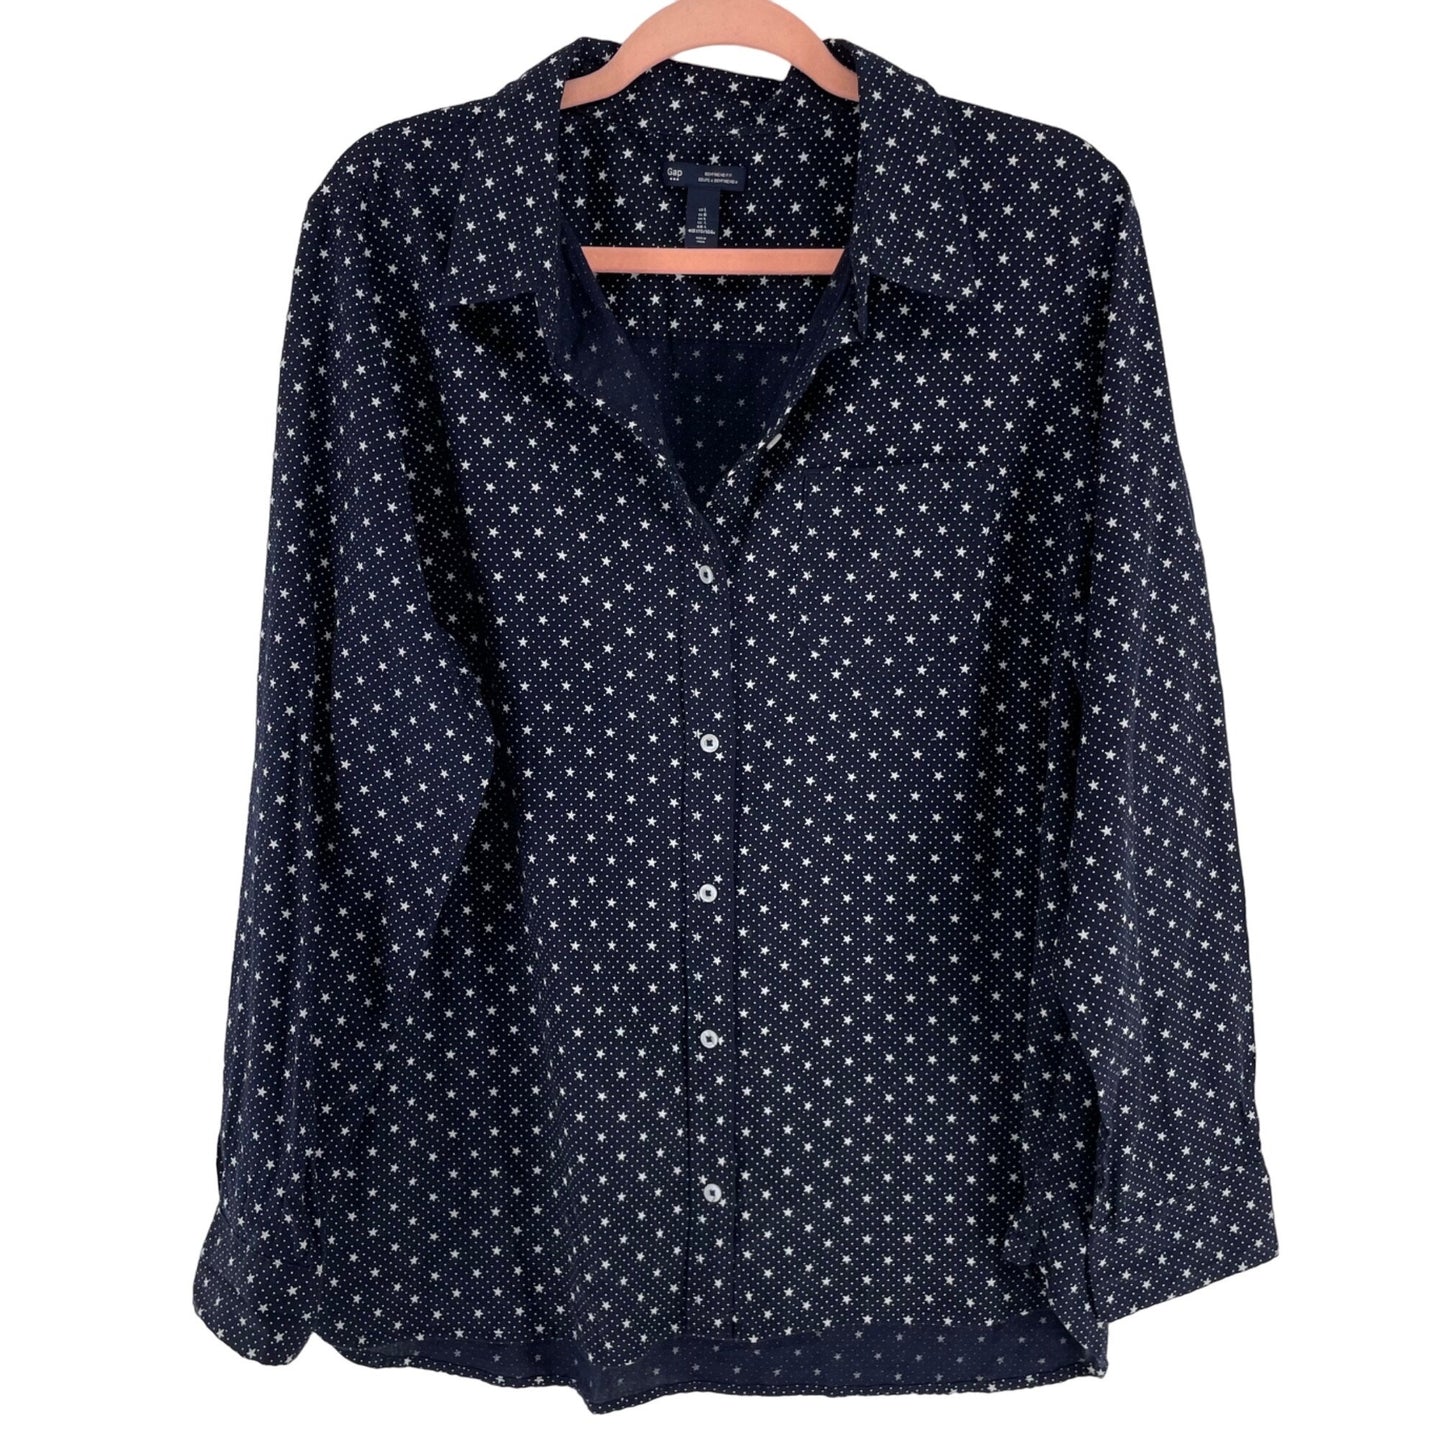 GAP Women's Size Large Navy Blue/White Star Pattern Long-Sleeved Button-Down Top